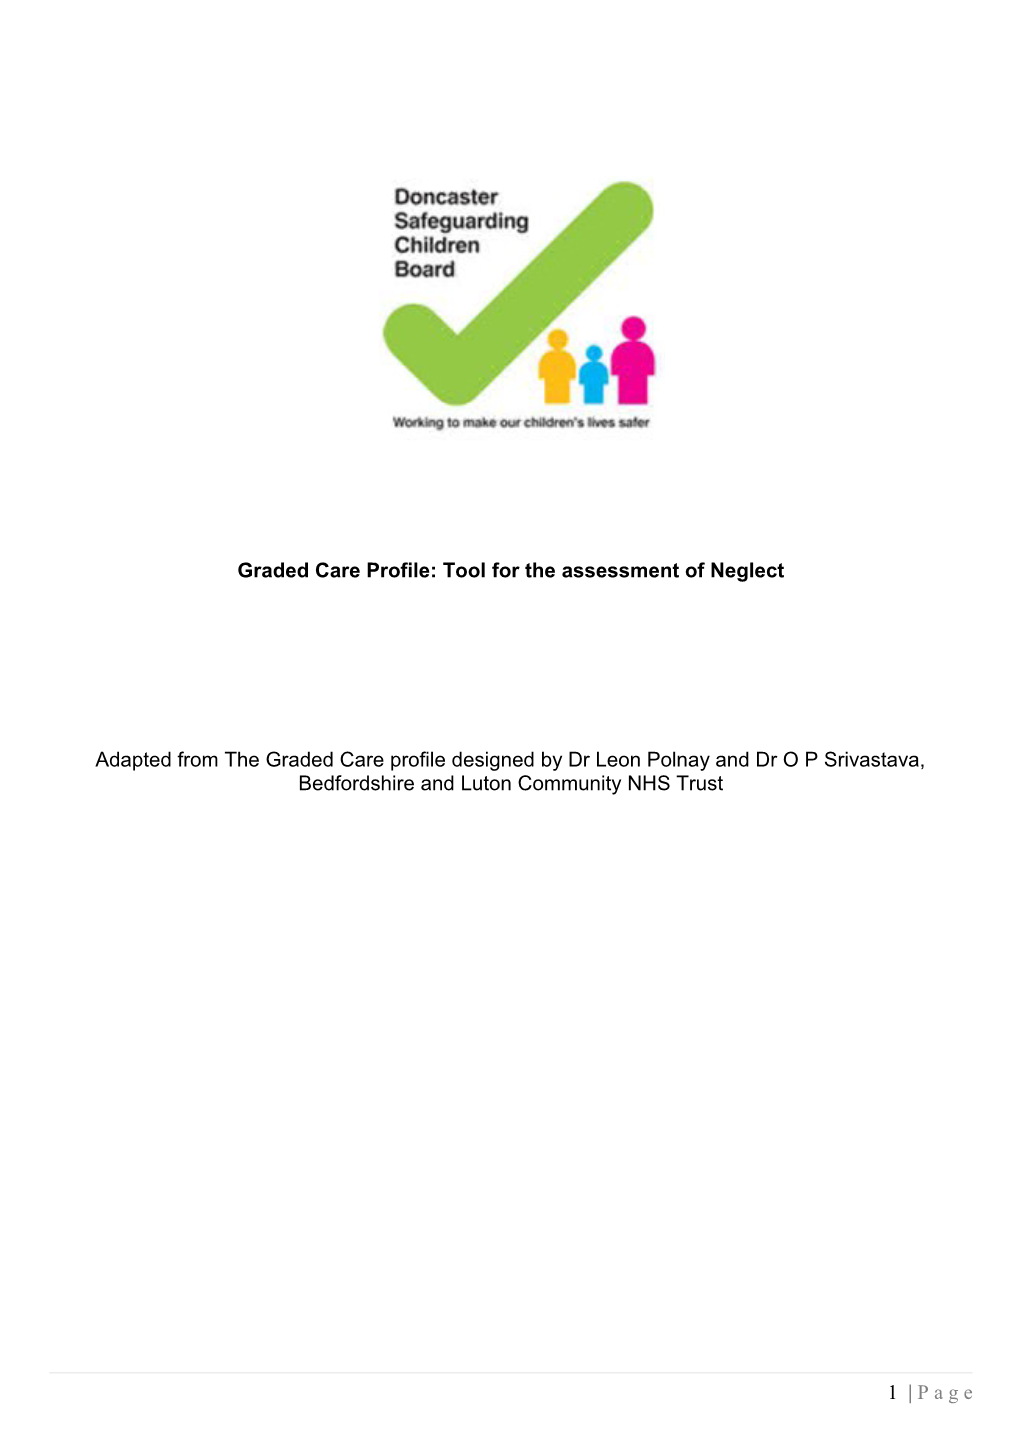 Graded Care Profile: Tool for the Assessment of Neglect